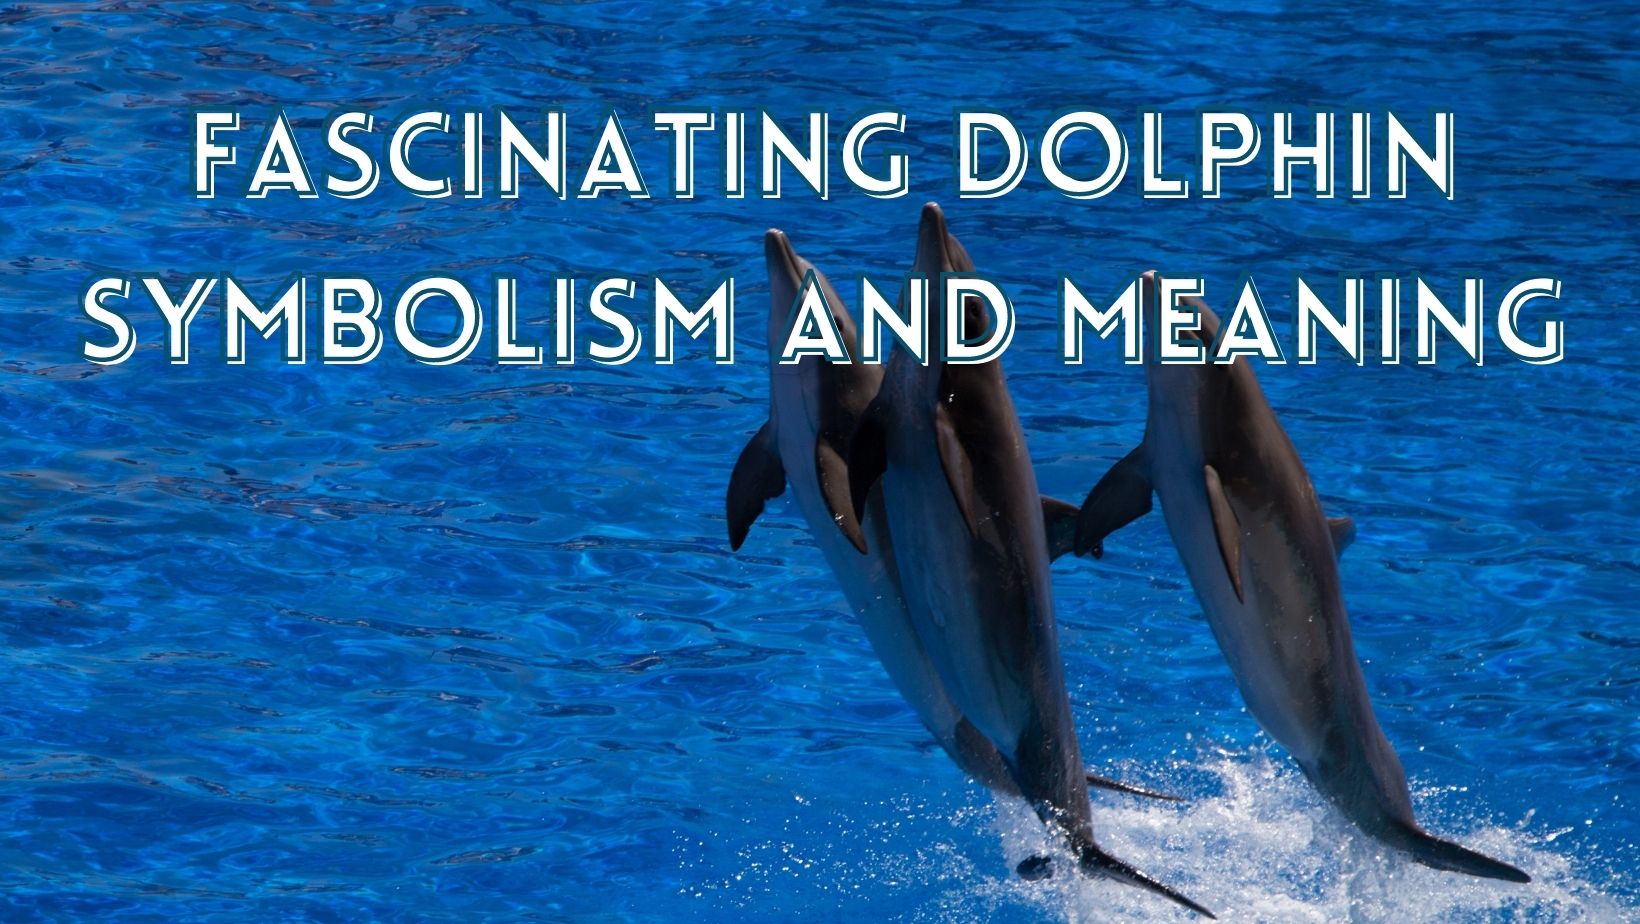 Symbolism and meaning of dolphin